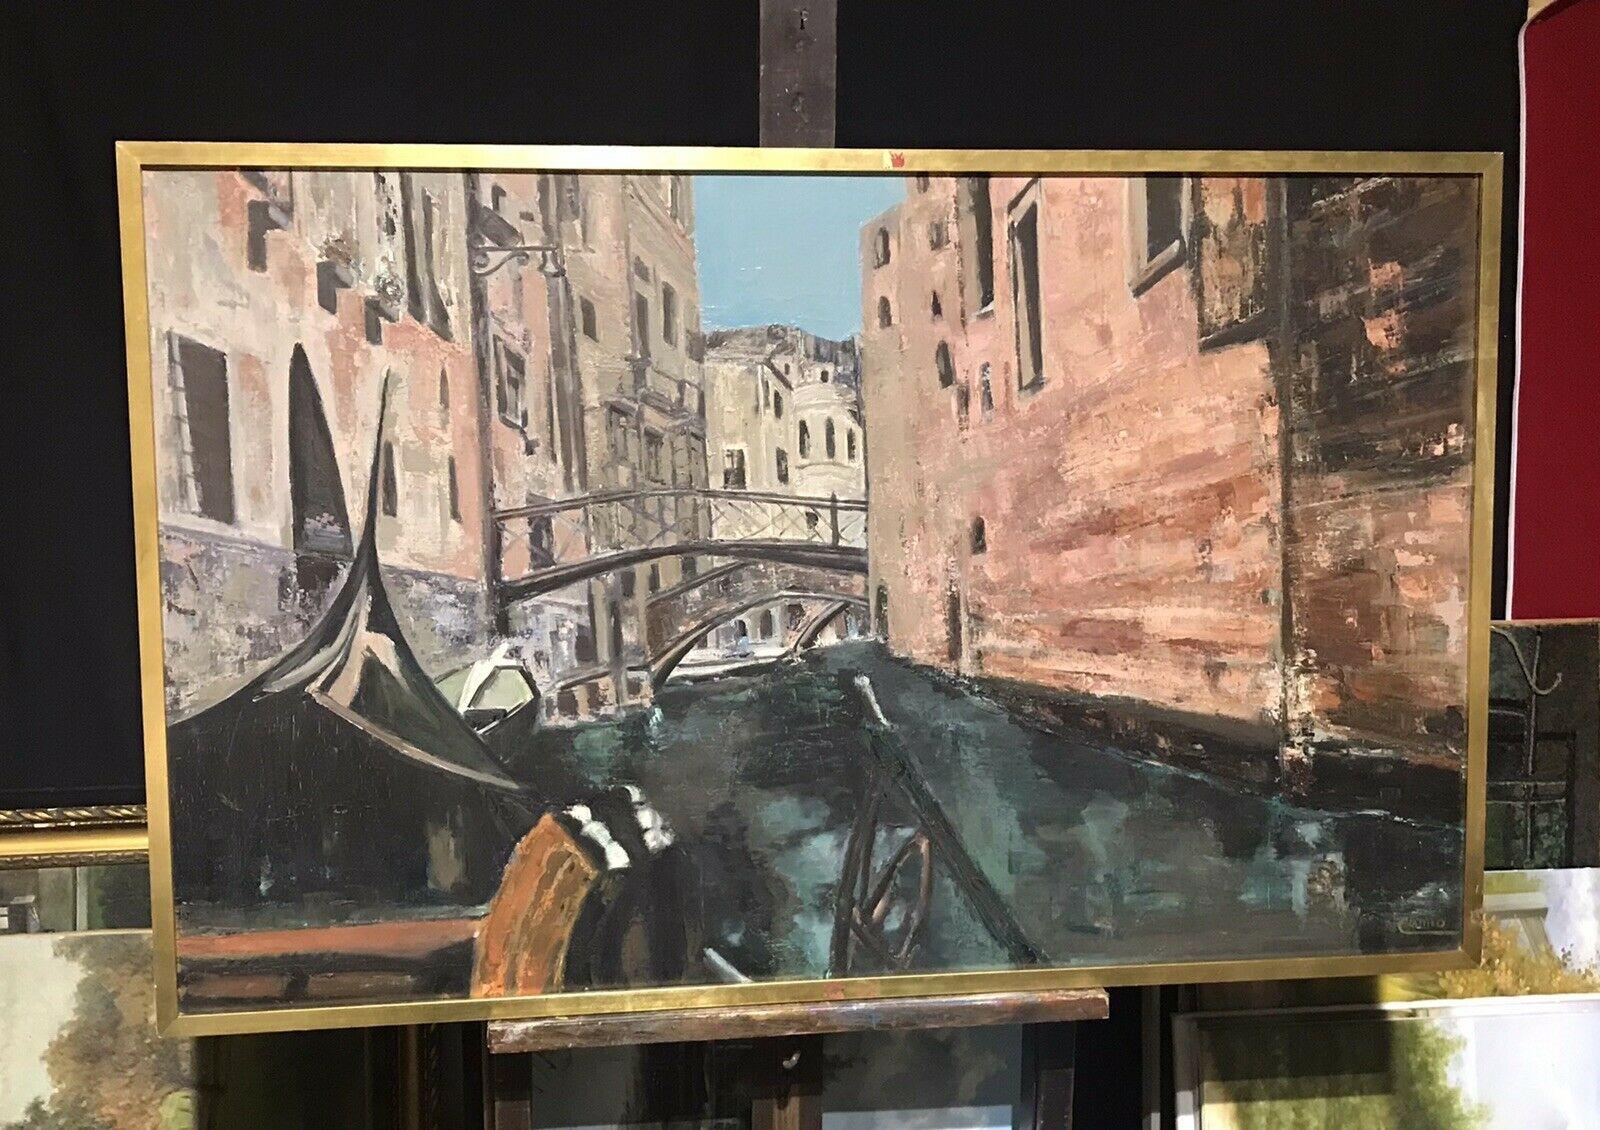 THIS AUCTION HAS NO RESERVE!

Artist/ School: Italian School, mid 20th century, signed lower right

Title: The Quiet Canal, Venice

Medium:  oil painting, on canvas, framed. 

Size:   frame: 33 x 52.5 inches
           painting: 32 x 51.5 inches
   